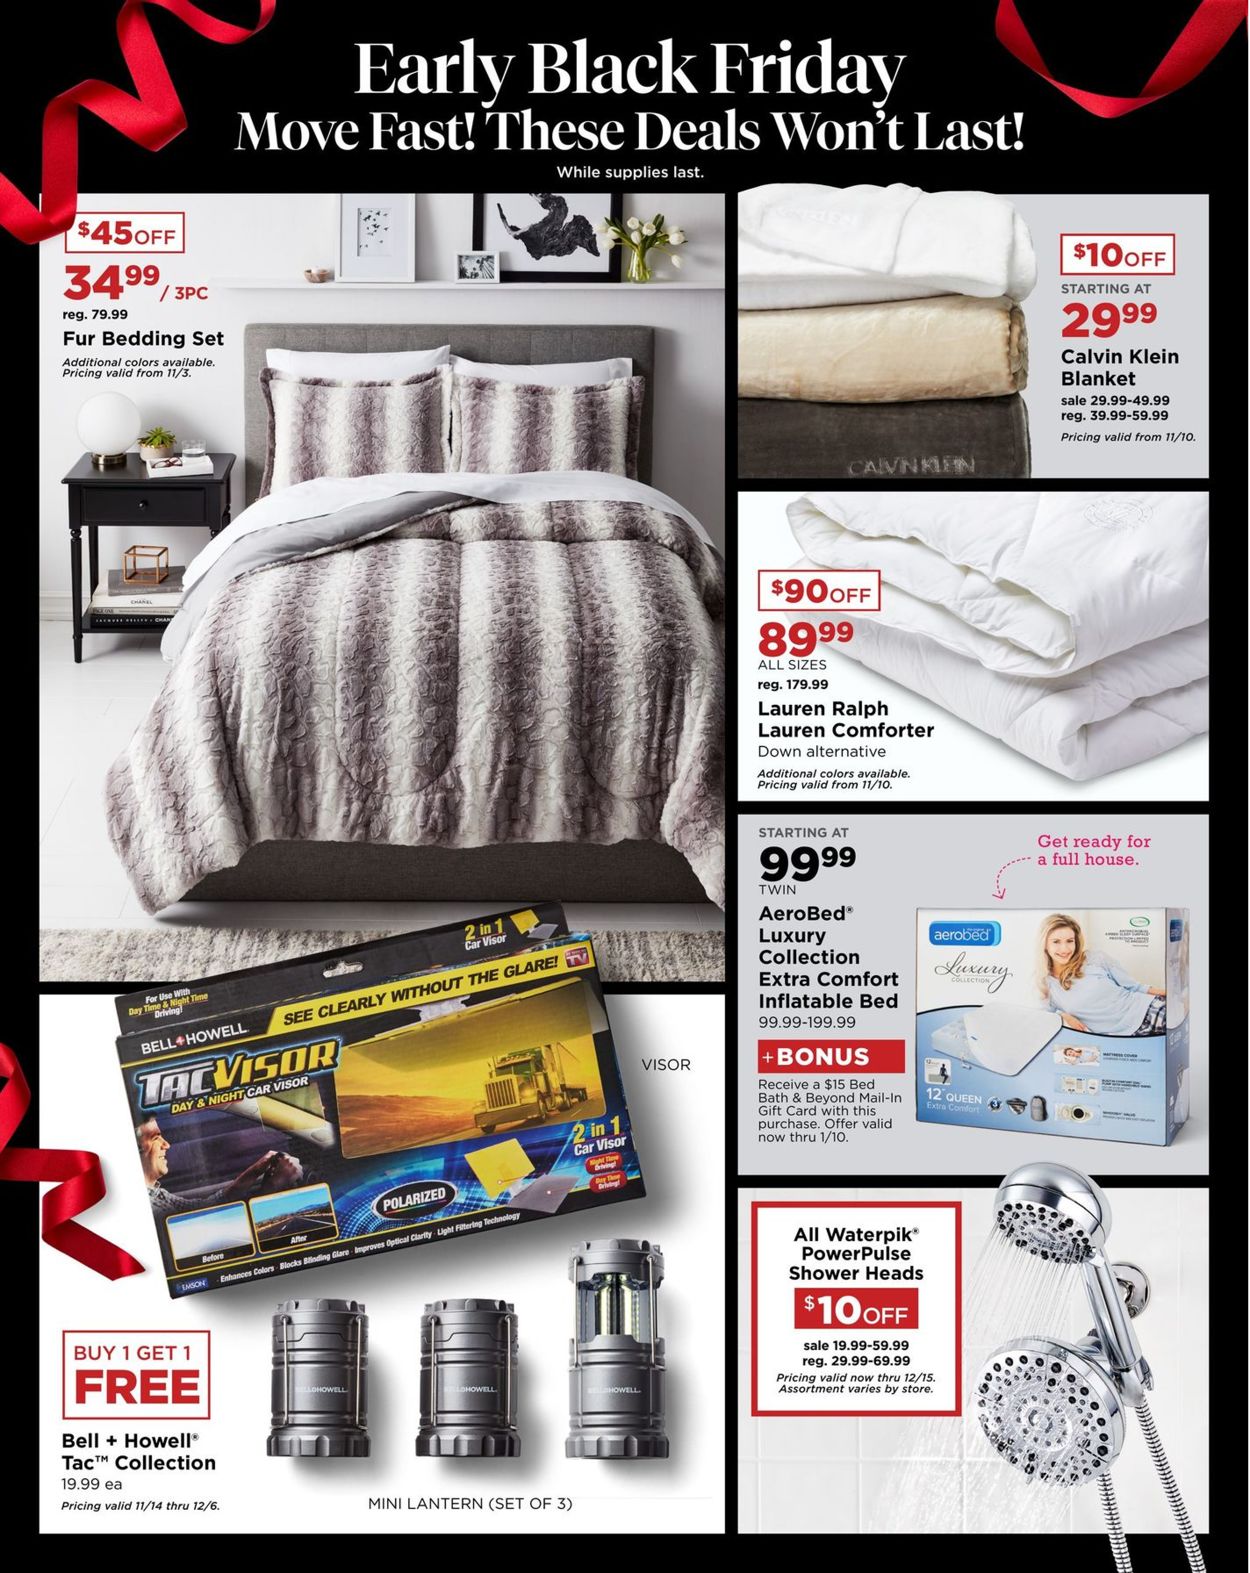 Bed Bath and Beyond - Black Friday Ad 2019 Current weekly ad 11/17 - 01 - What Time Bed Bath And Beyond Opens On Black Friday